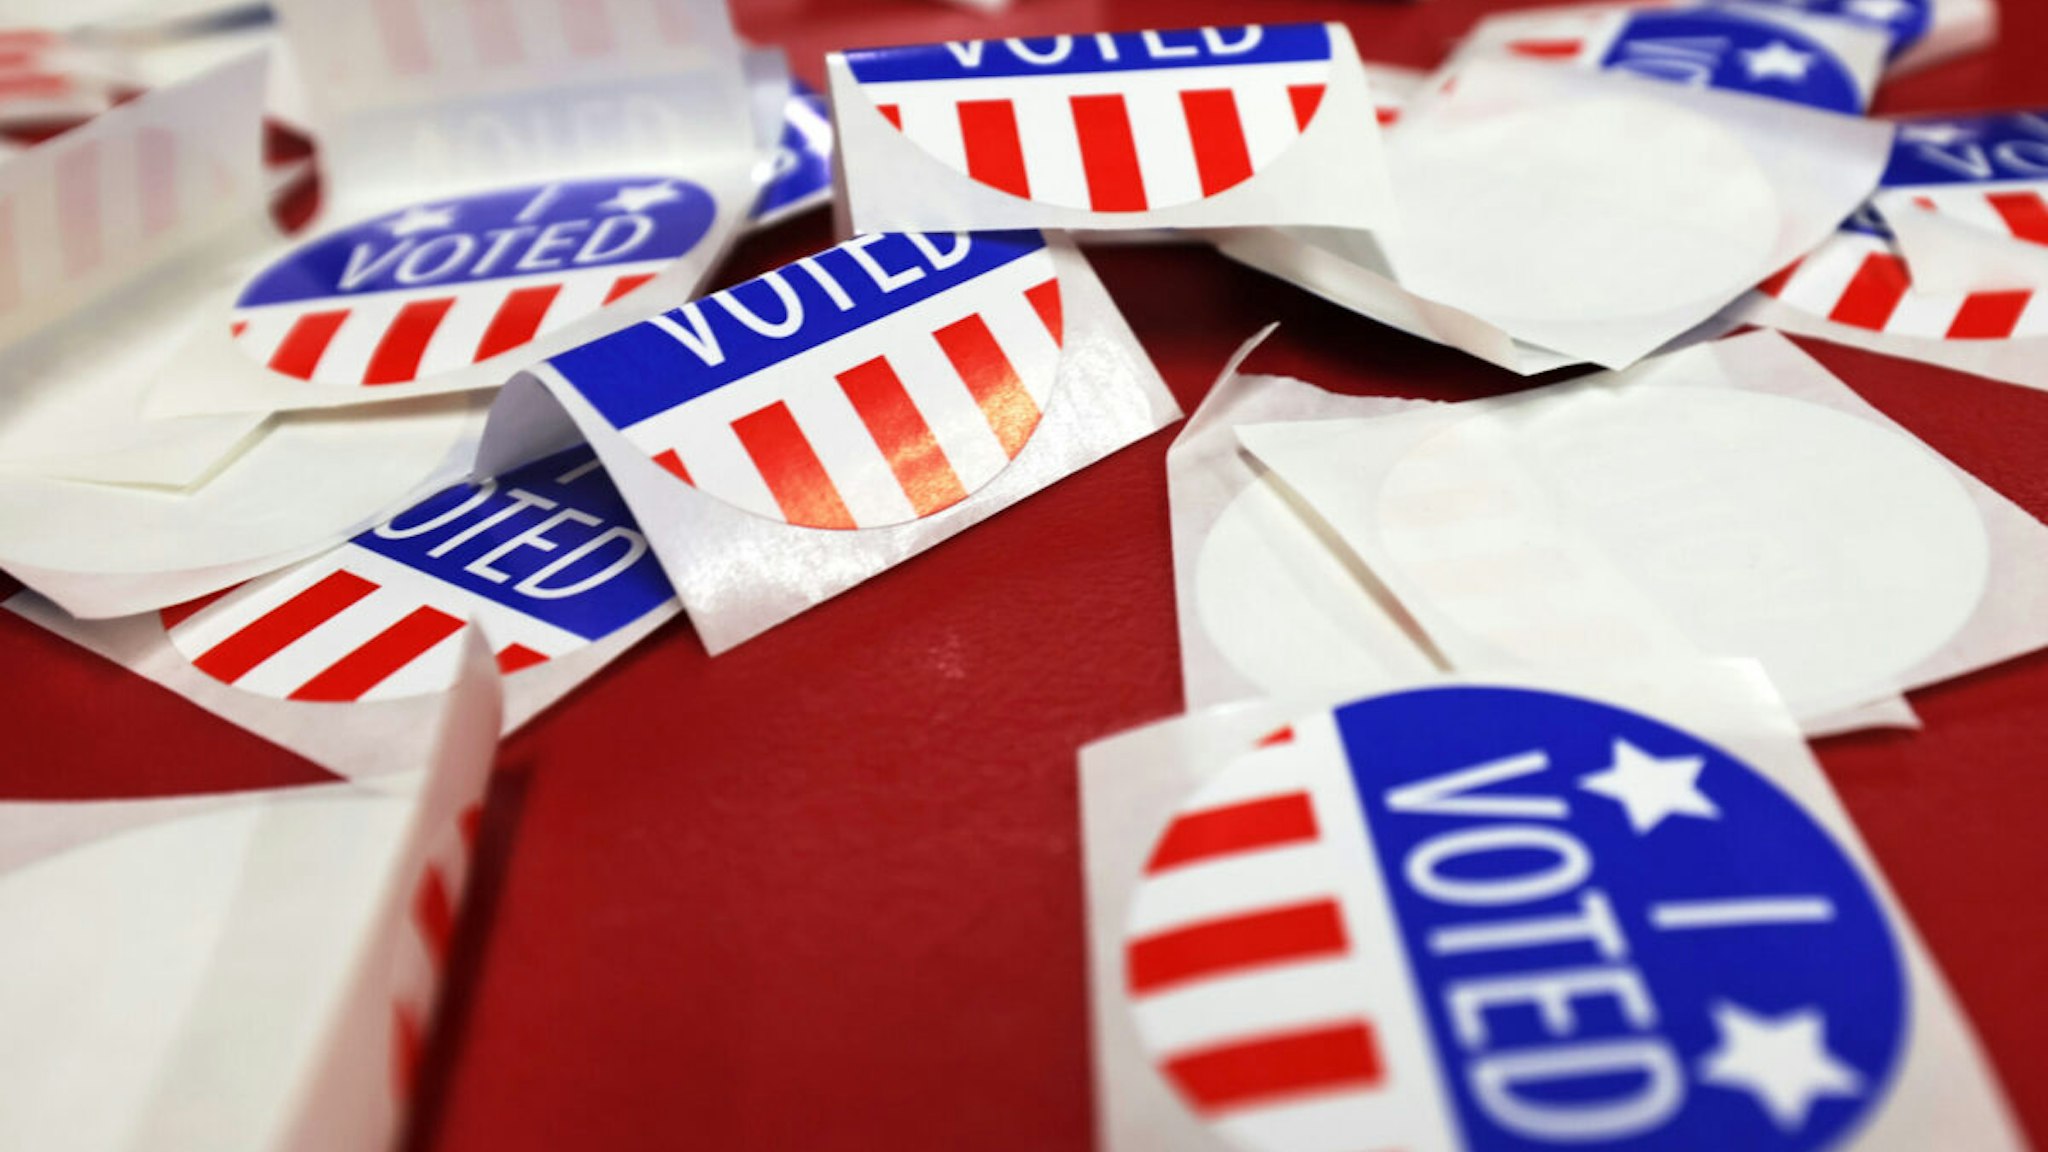 "I Voted" stickers are seen on a table during the Midterm Primary Election Day at Engine Company No. 2 Firehouse on June 07, 2022 in Hoboken, New Jersey.